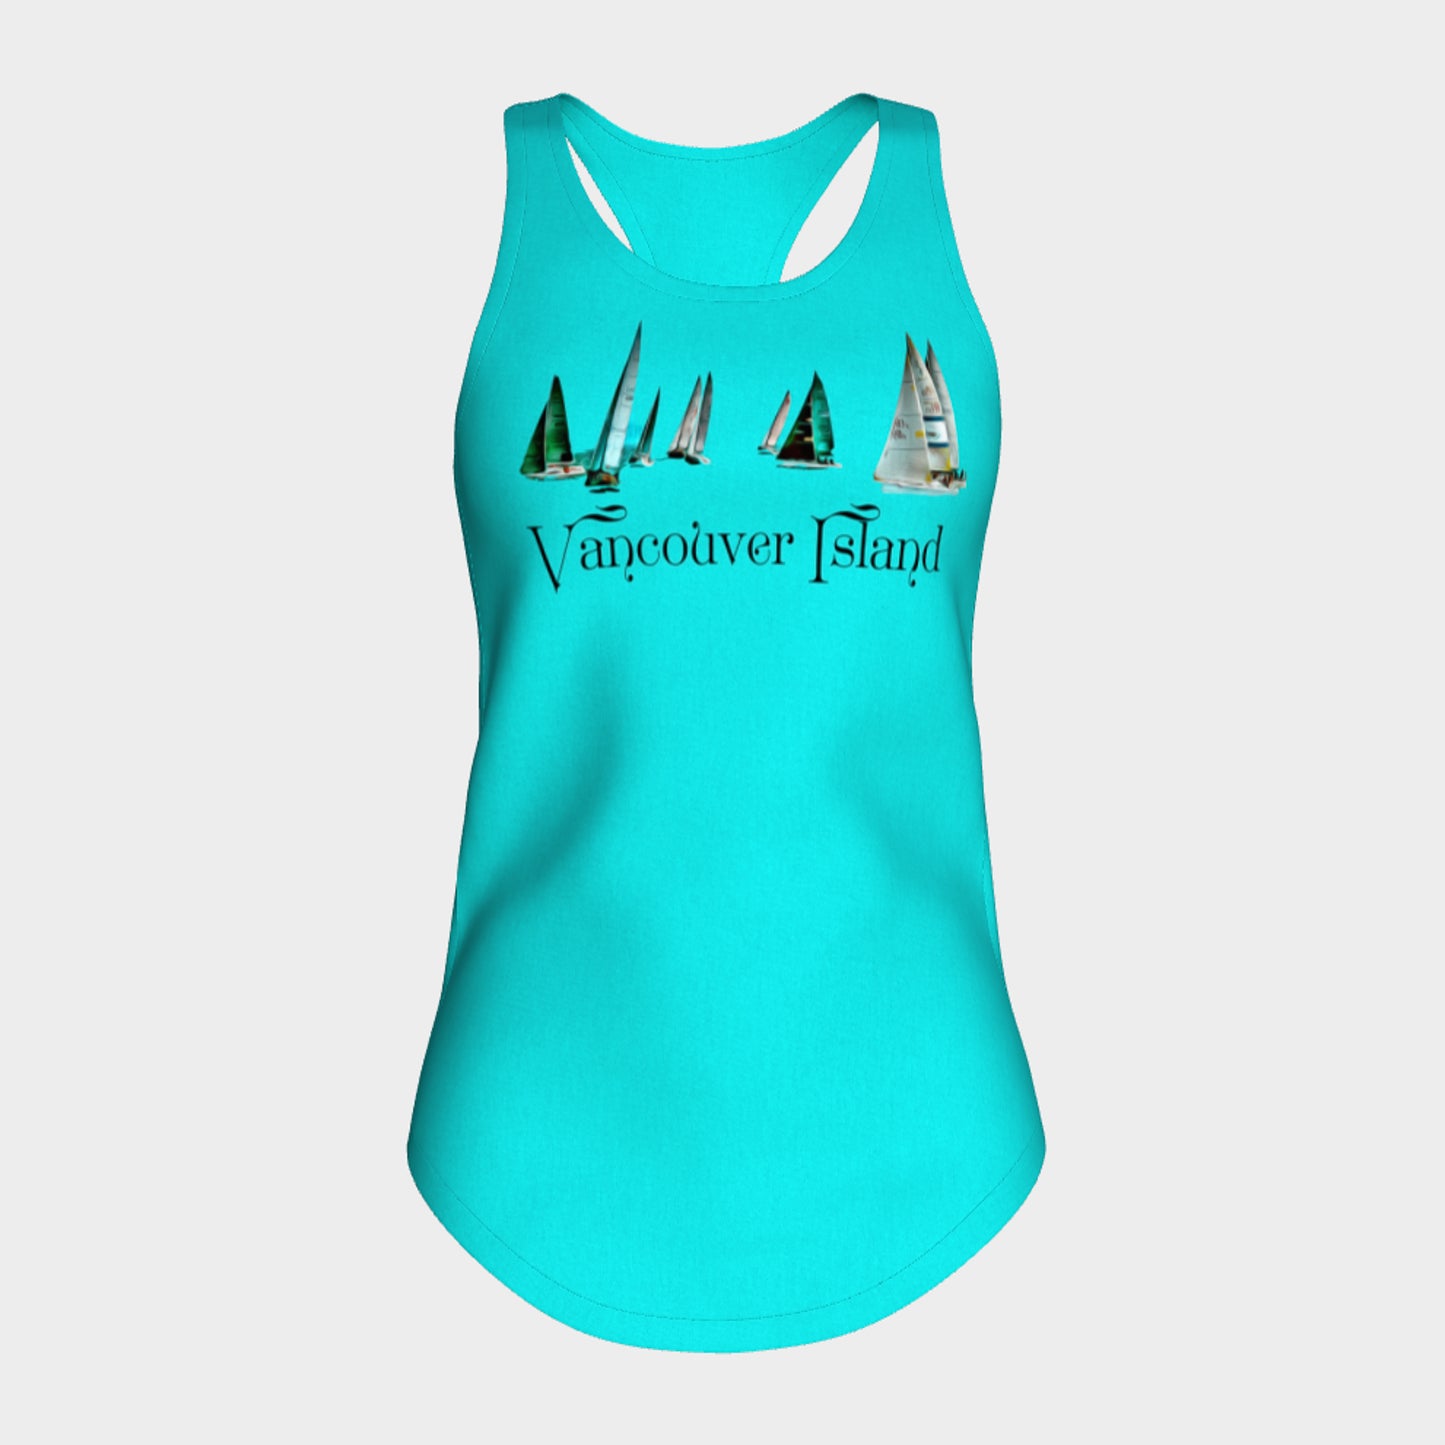 Sail Away Vancouver Island Racerback Tank Top  Excellent choice for the summer or for working out.   Made from 60% spun cotton and 40% poly for a mix of comfort and performance, you get it all (including my photography and digital art) with this custom printed racerback tank top.   Van Isle Goddess Next Level racerback tank top will quickly become you go-to tank top because of the super comfy fit!